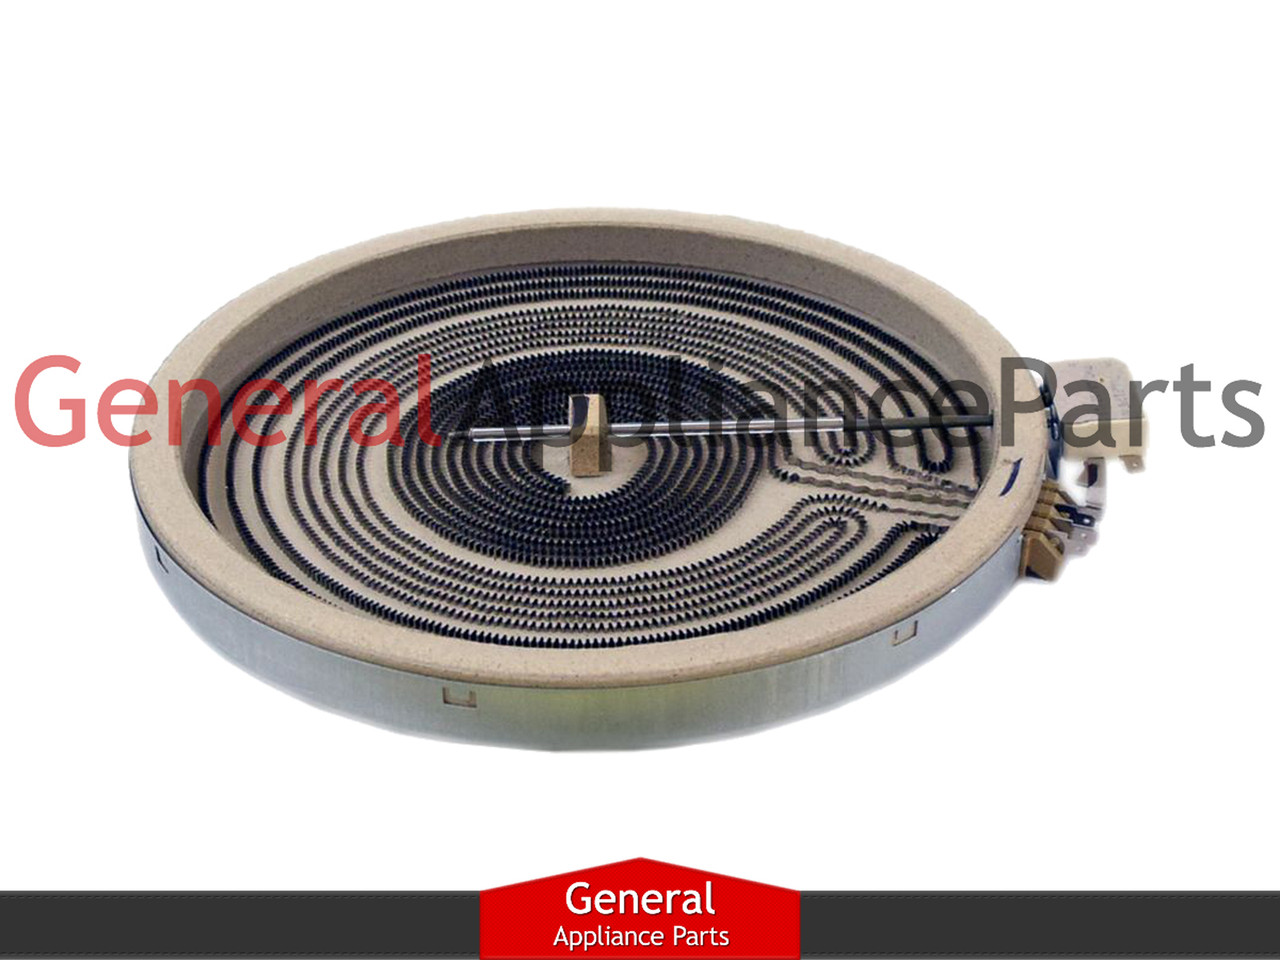 GE Replacement Stove Range Oven Radiant Heating Element WB30X24111 AP5989975 